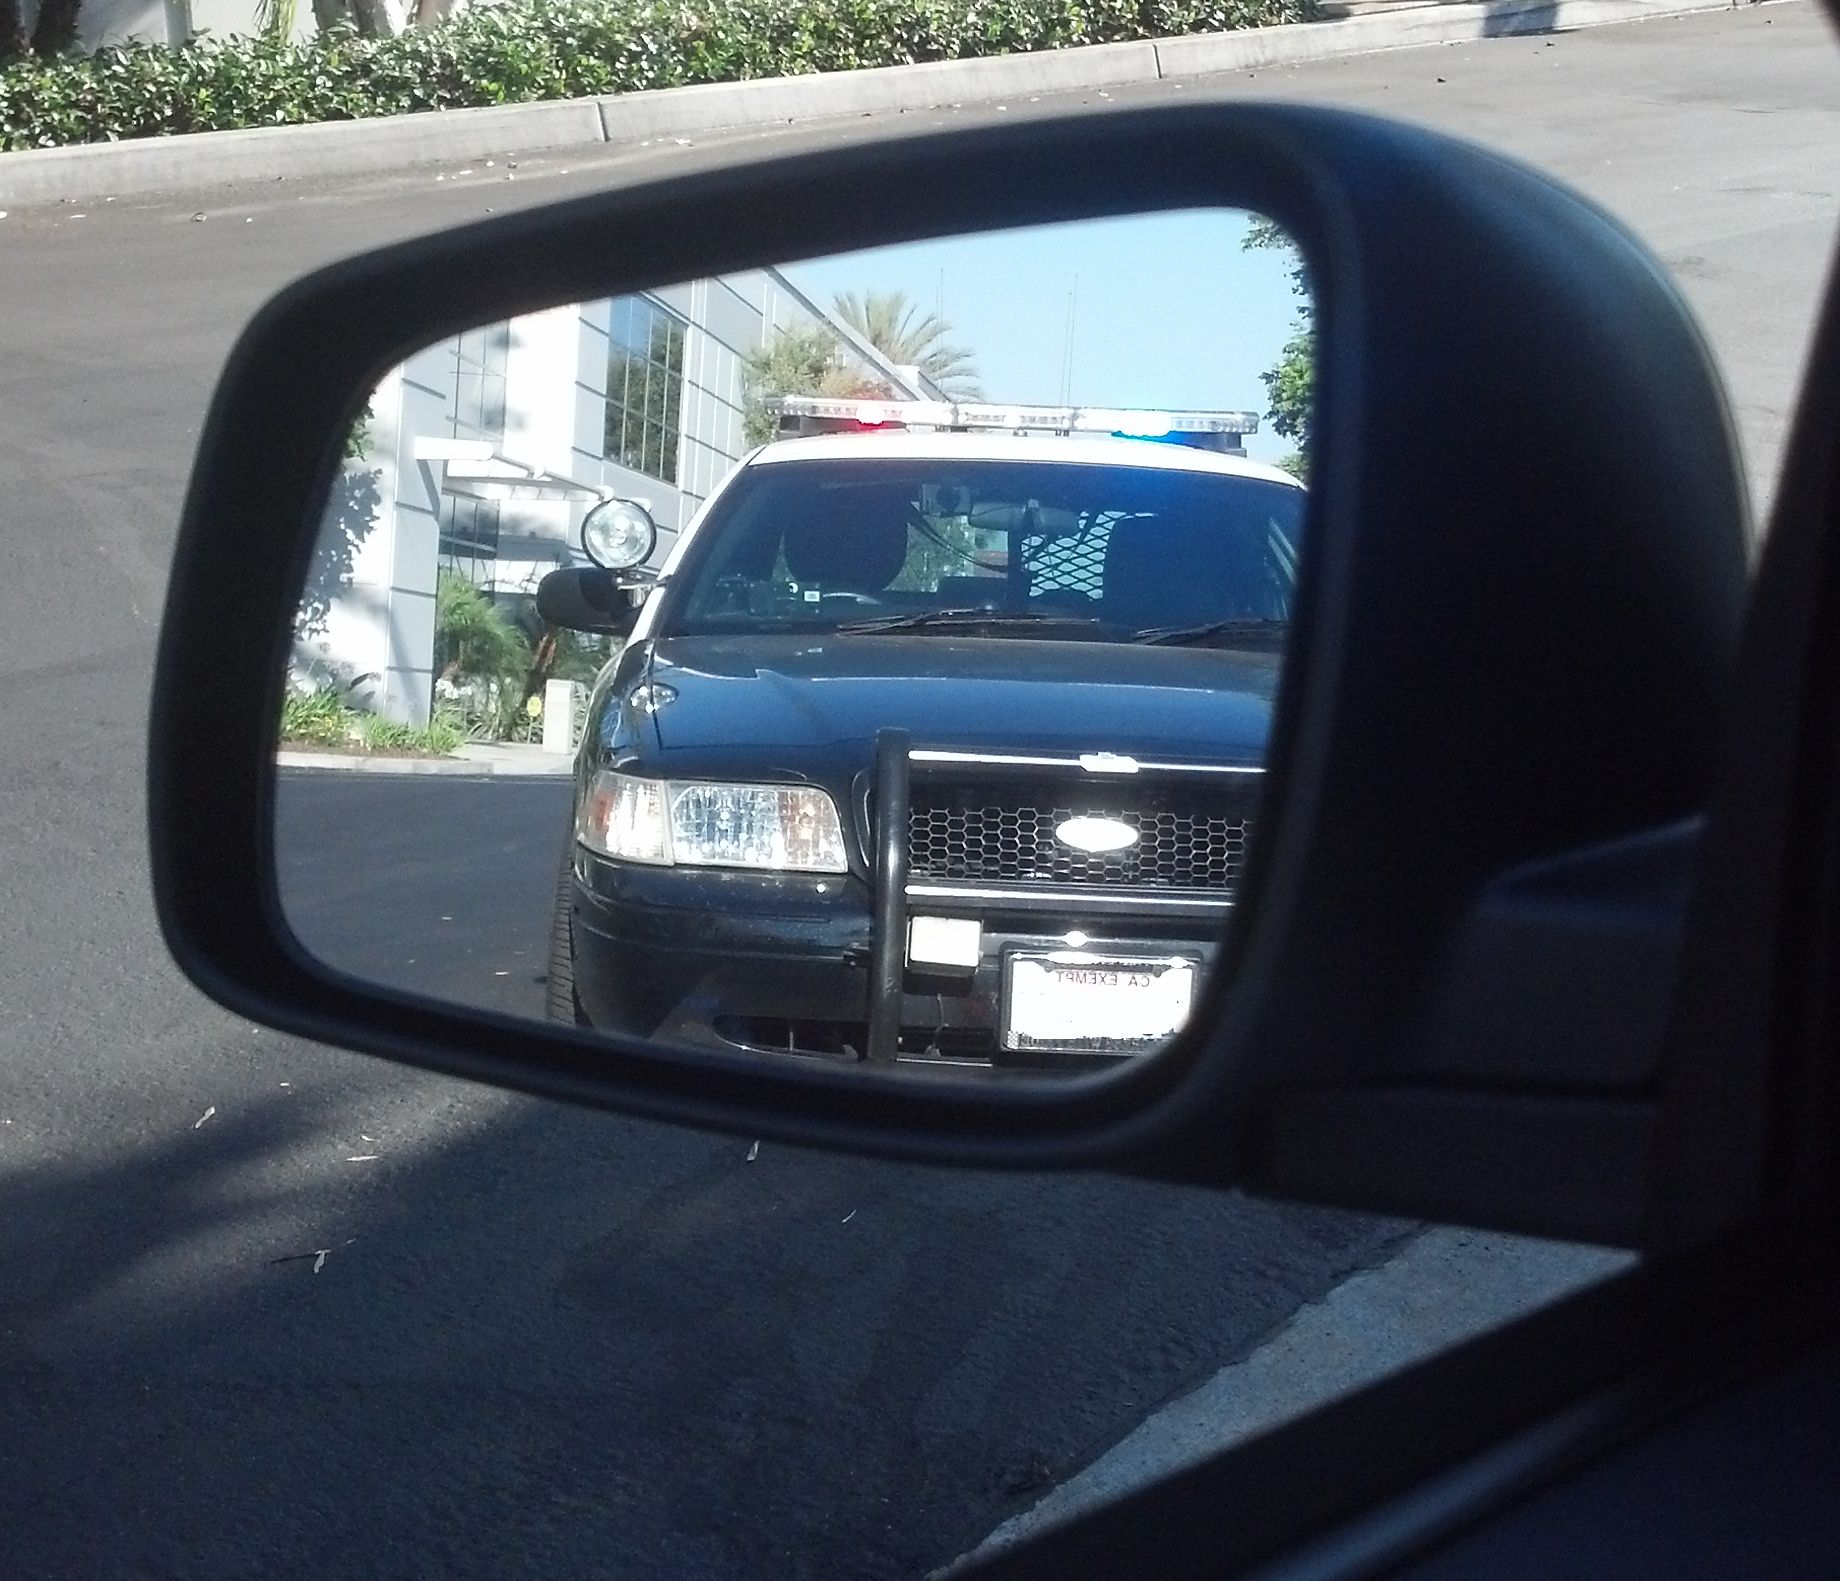 Pic of what it might look like getting pulled over in an EVO